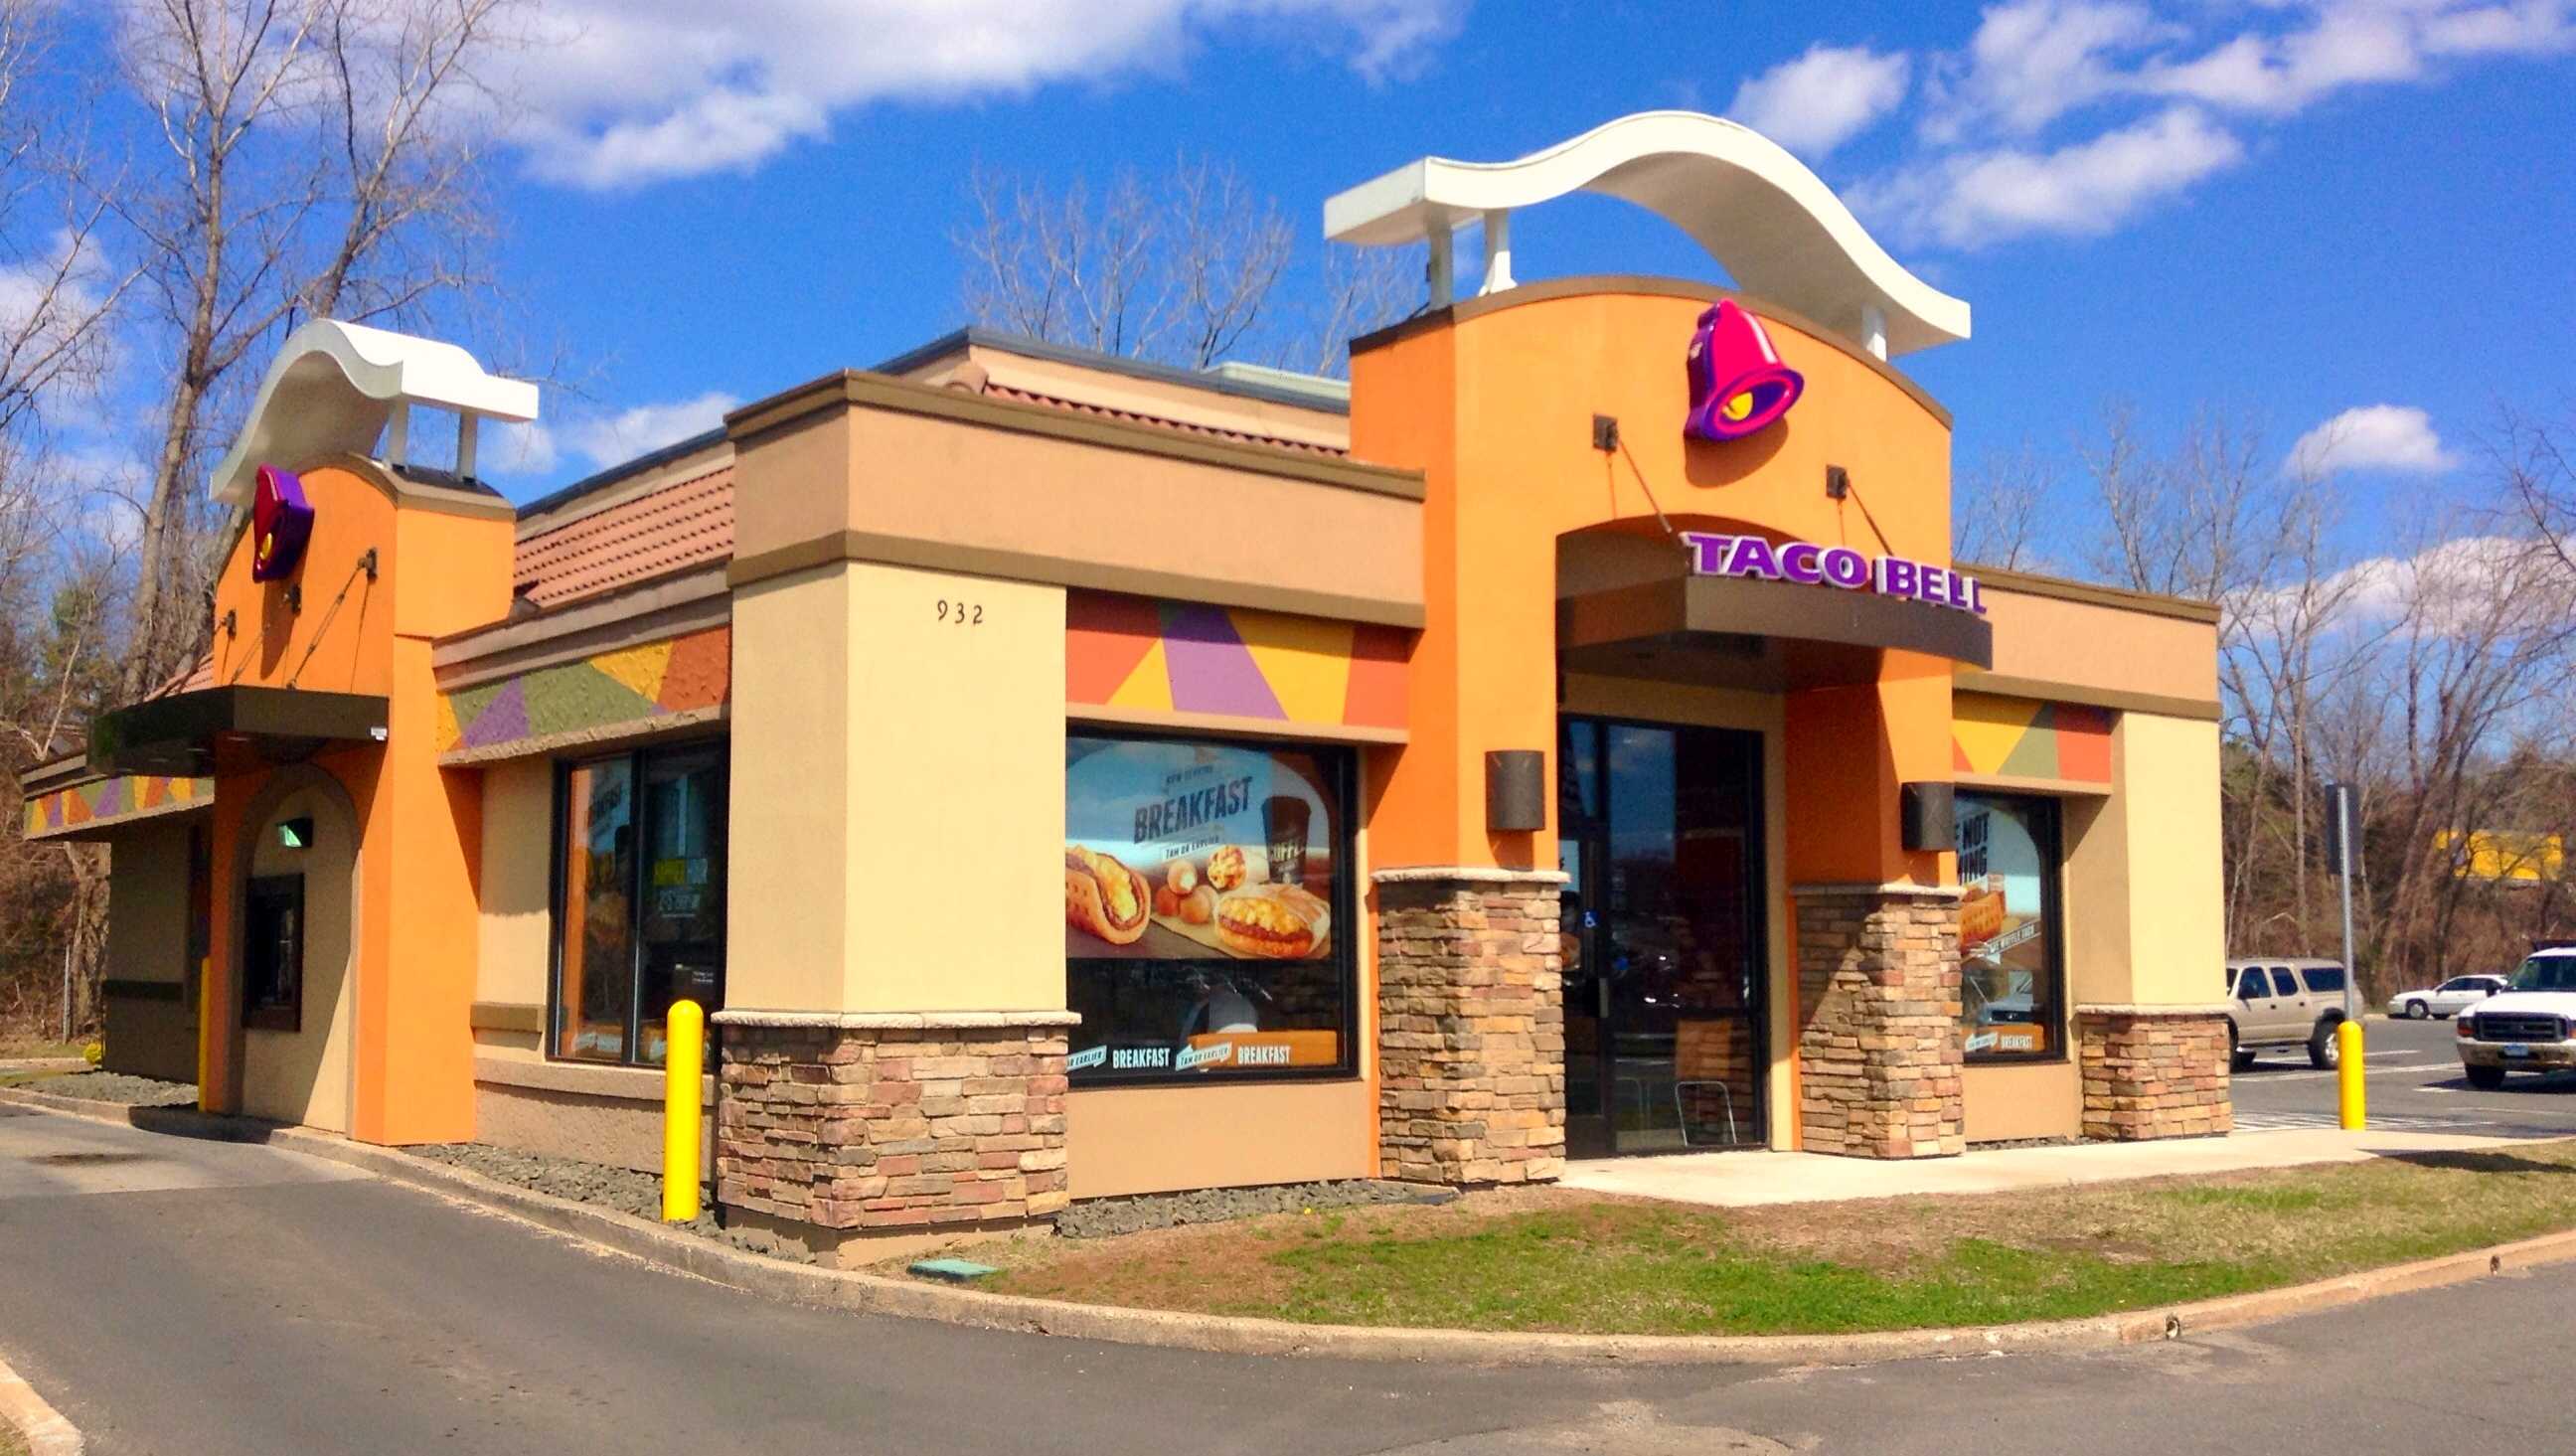 The future of Taco Bell: Fewer drive-thrus, more booze